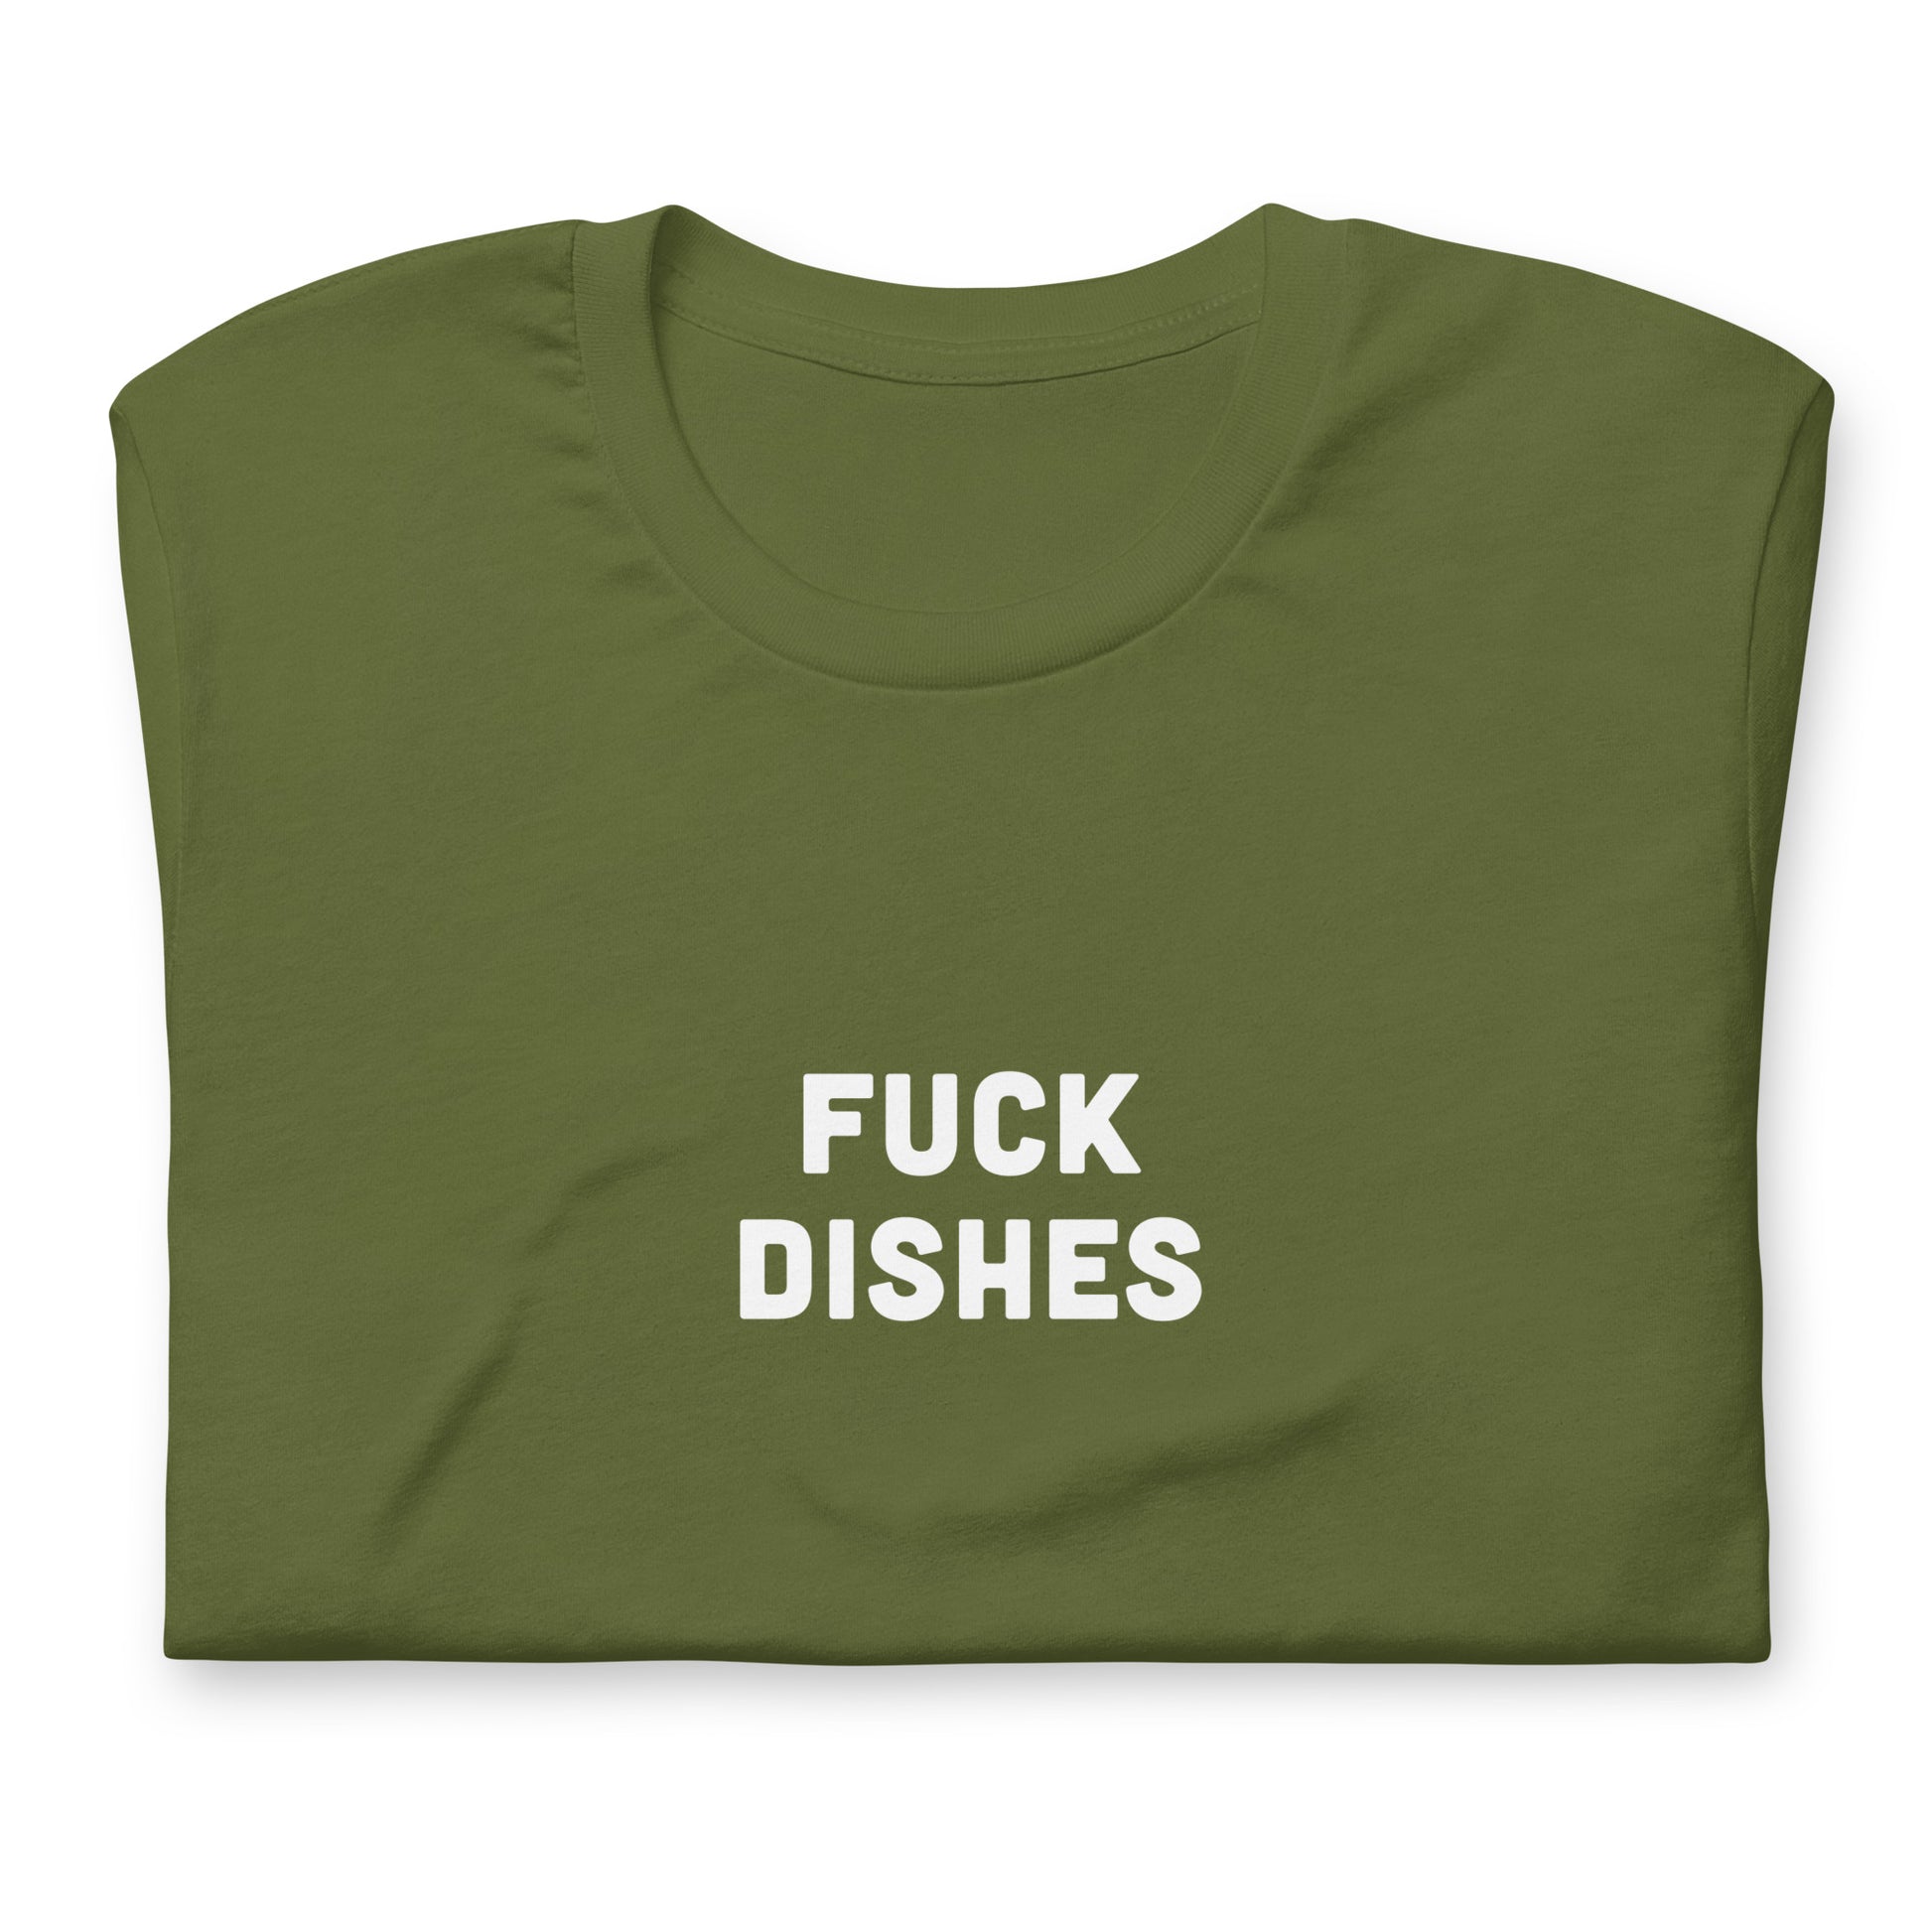 Fuck Dishes T-Shirt Size M Color Navy